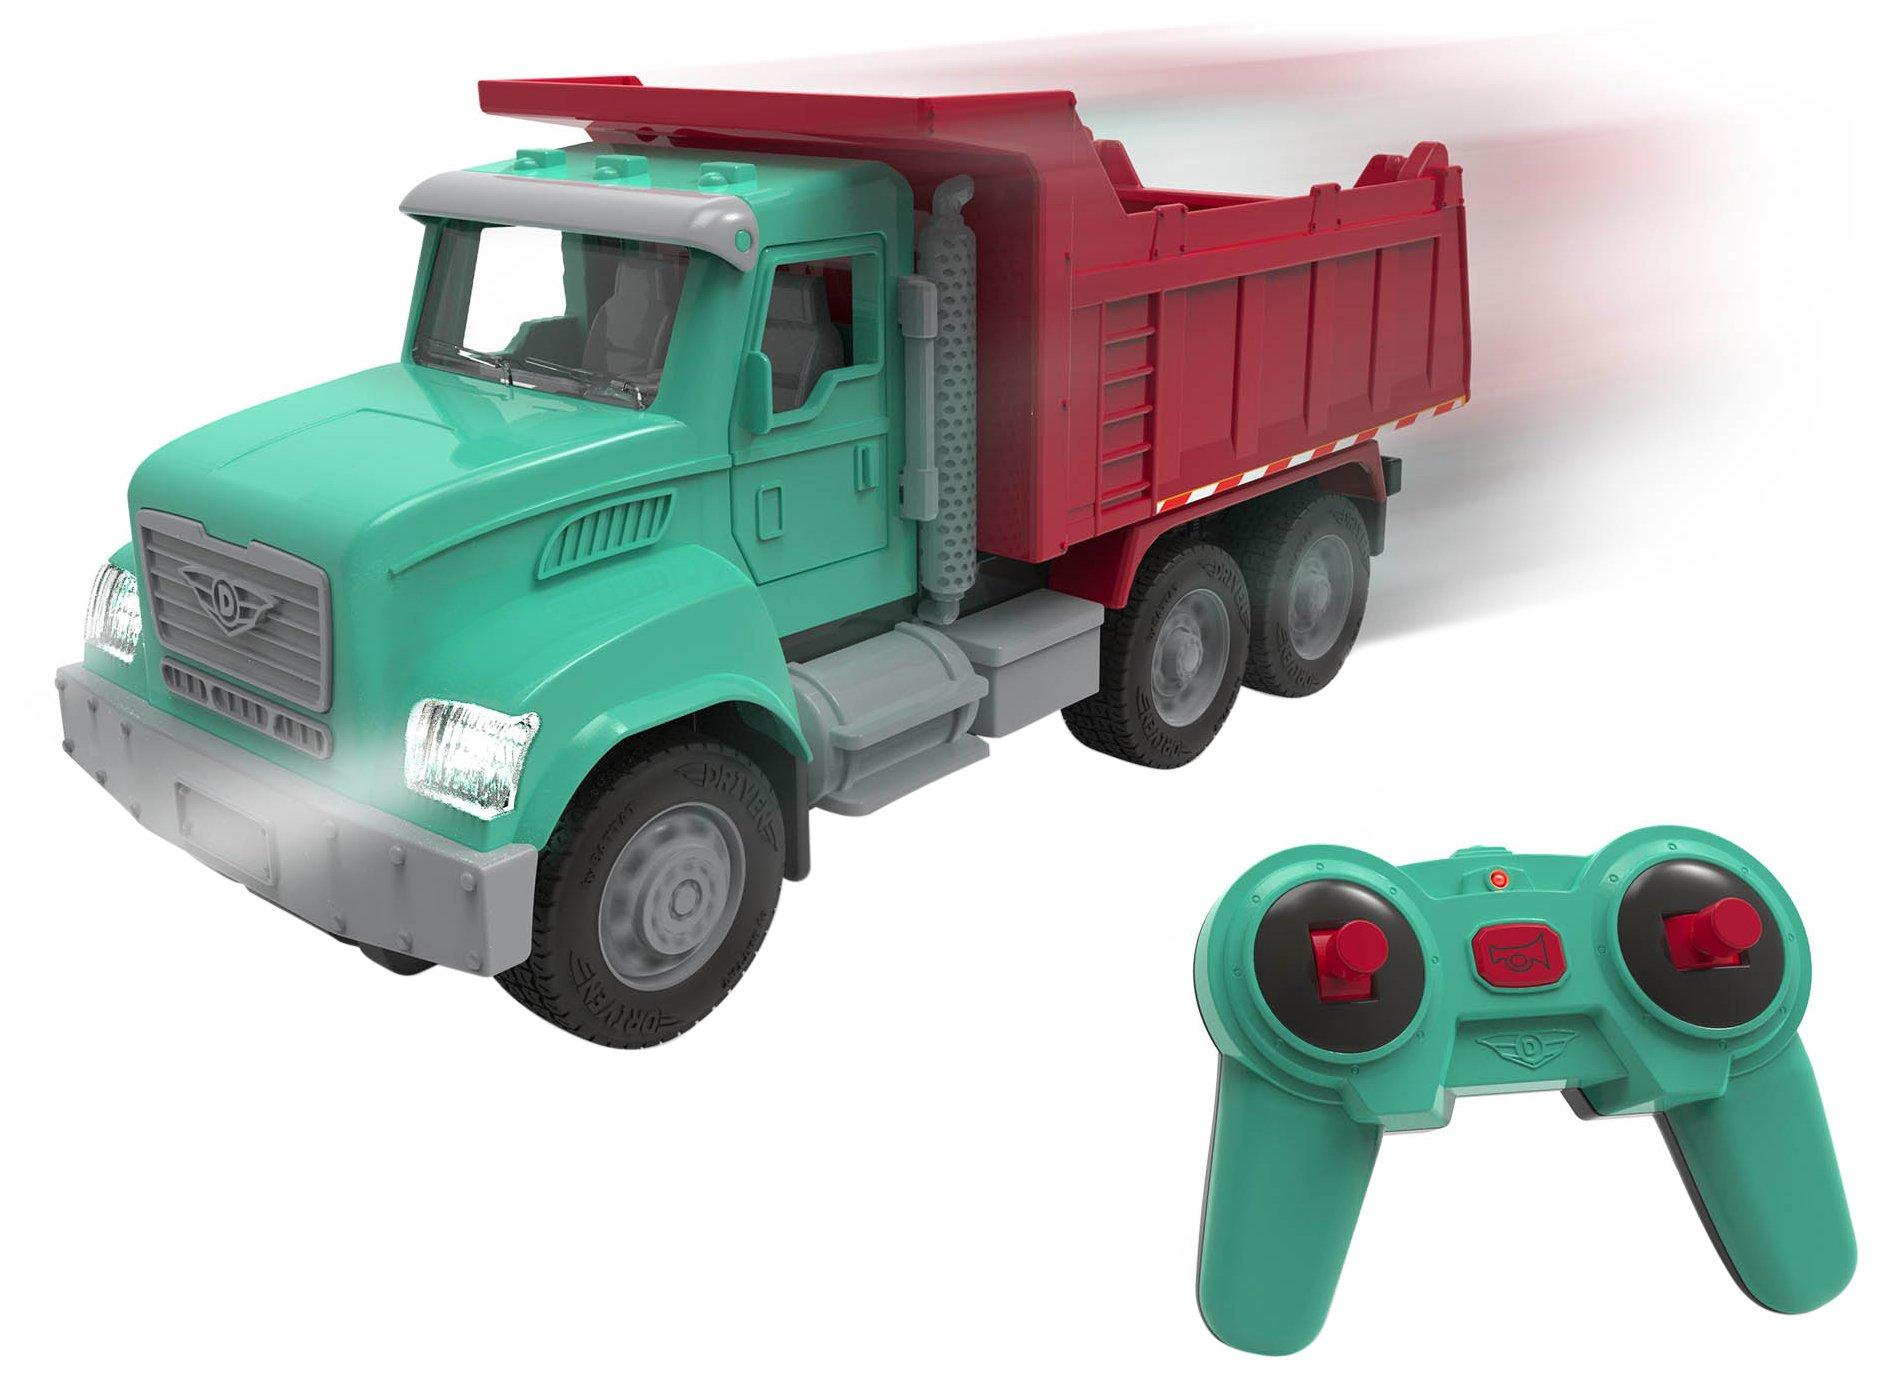 Driven R/C Micro Dump Truck Toy Playset